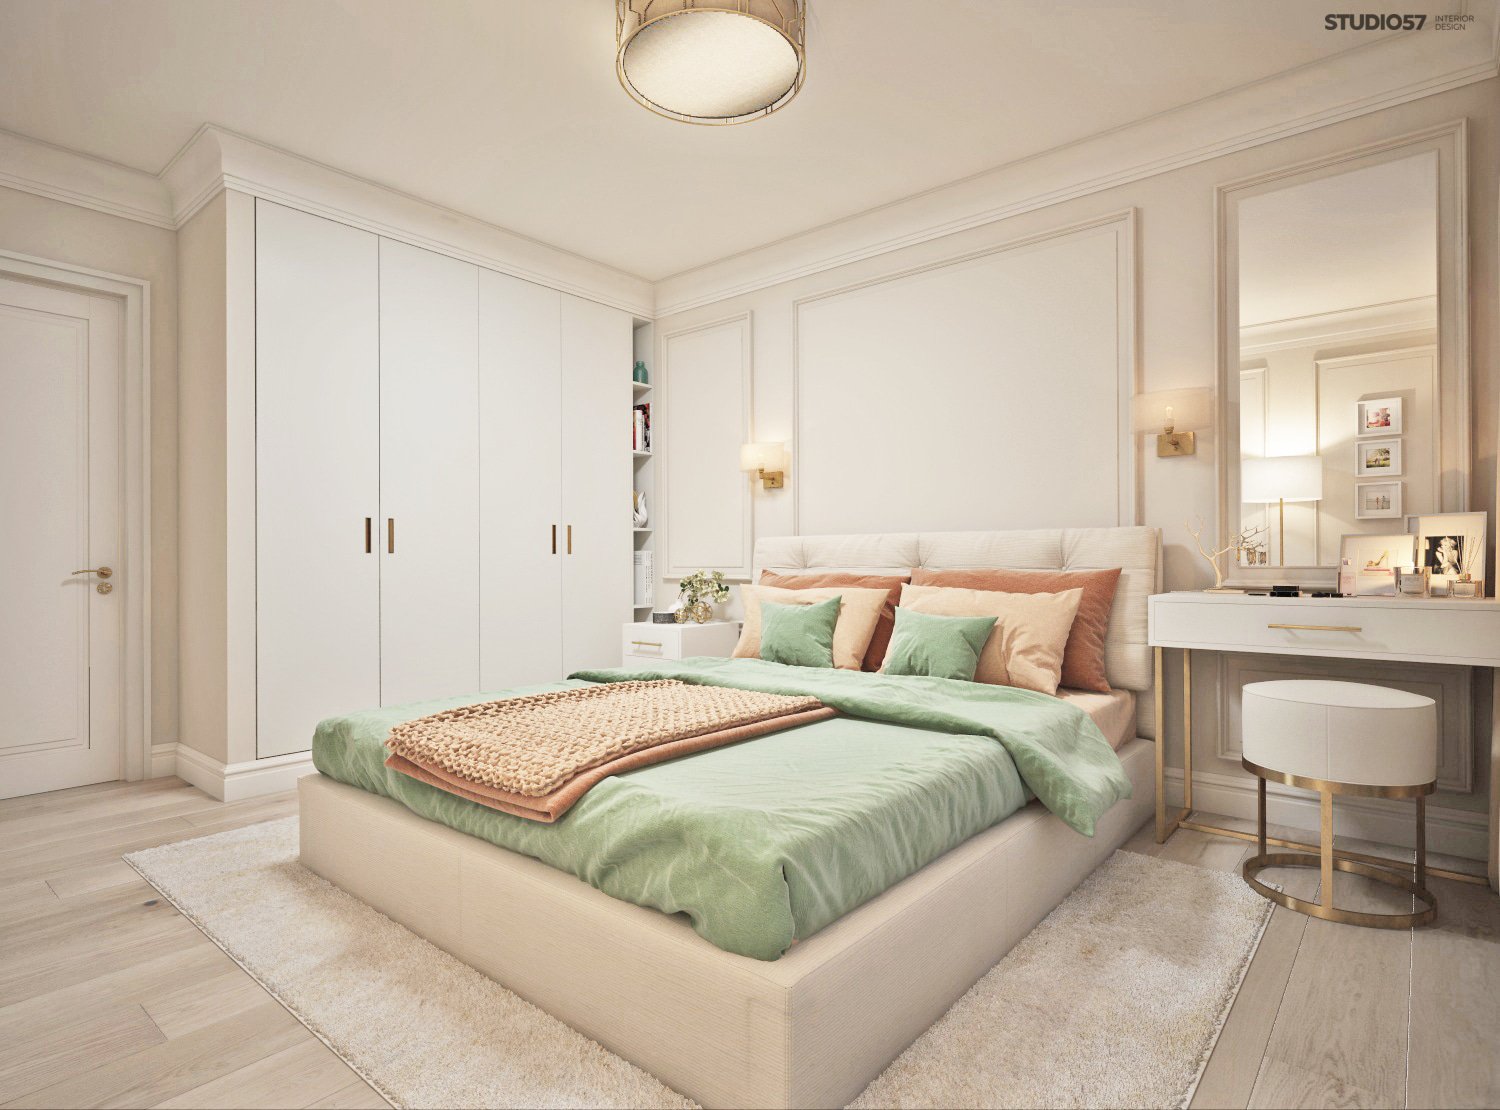 Interior of a bedroom in a modern classic style image